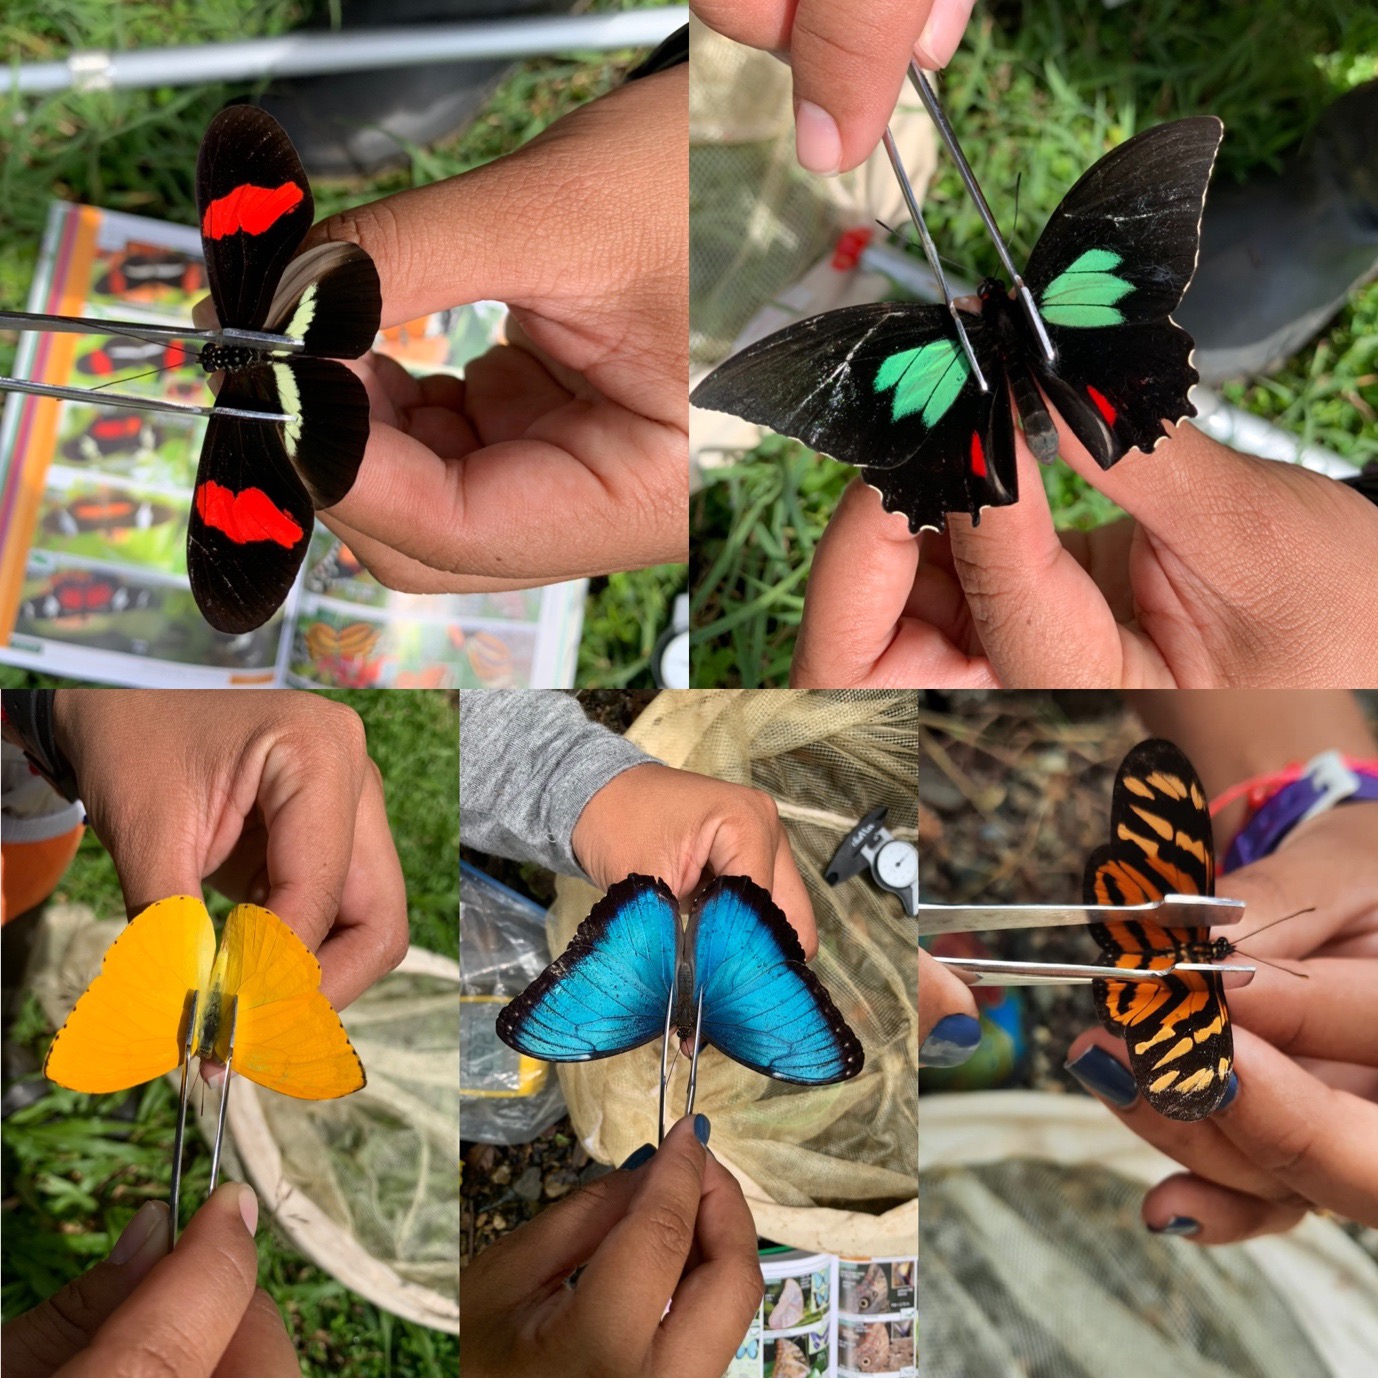 Just a small selection of the butterflies we catch. Each butterfly is photographed so we can refer back to it later in the project.